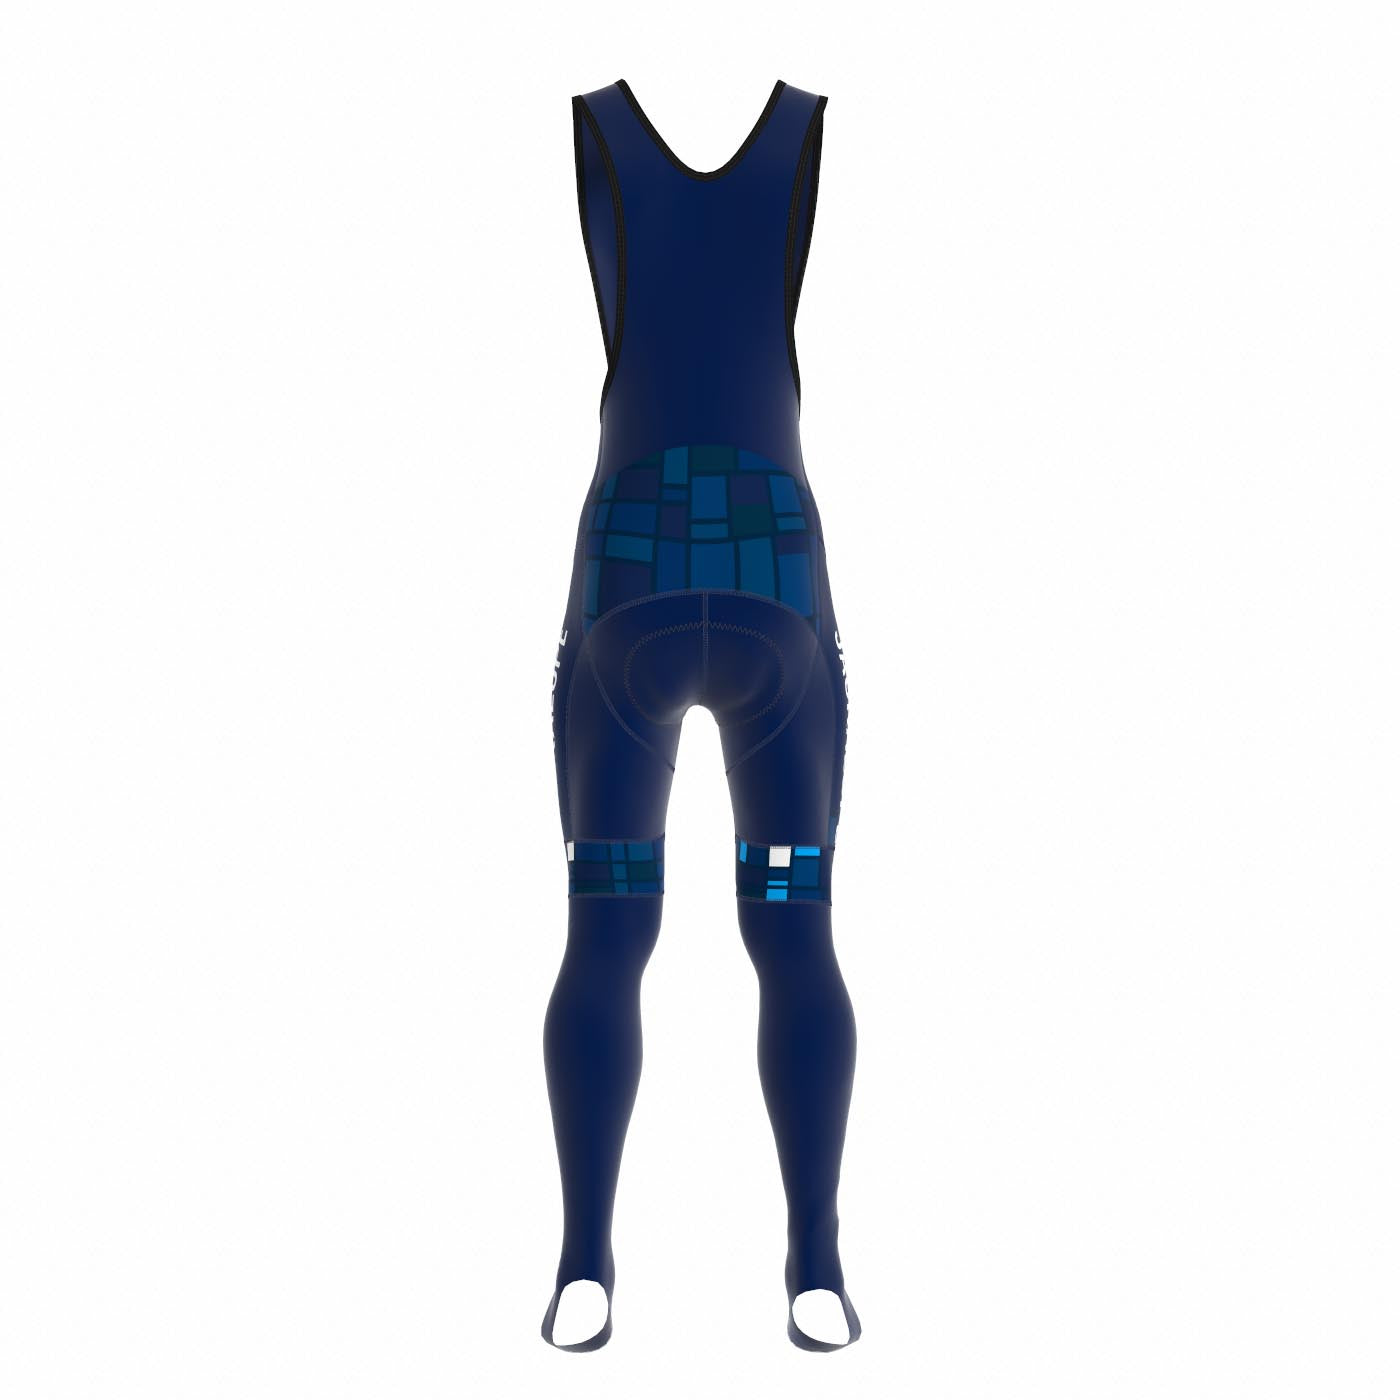 Epic Bibtights Tempest Full Protect Reflect - Women